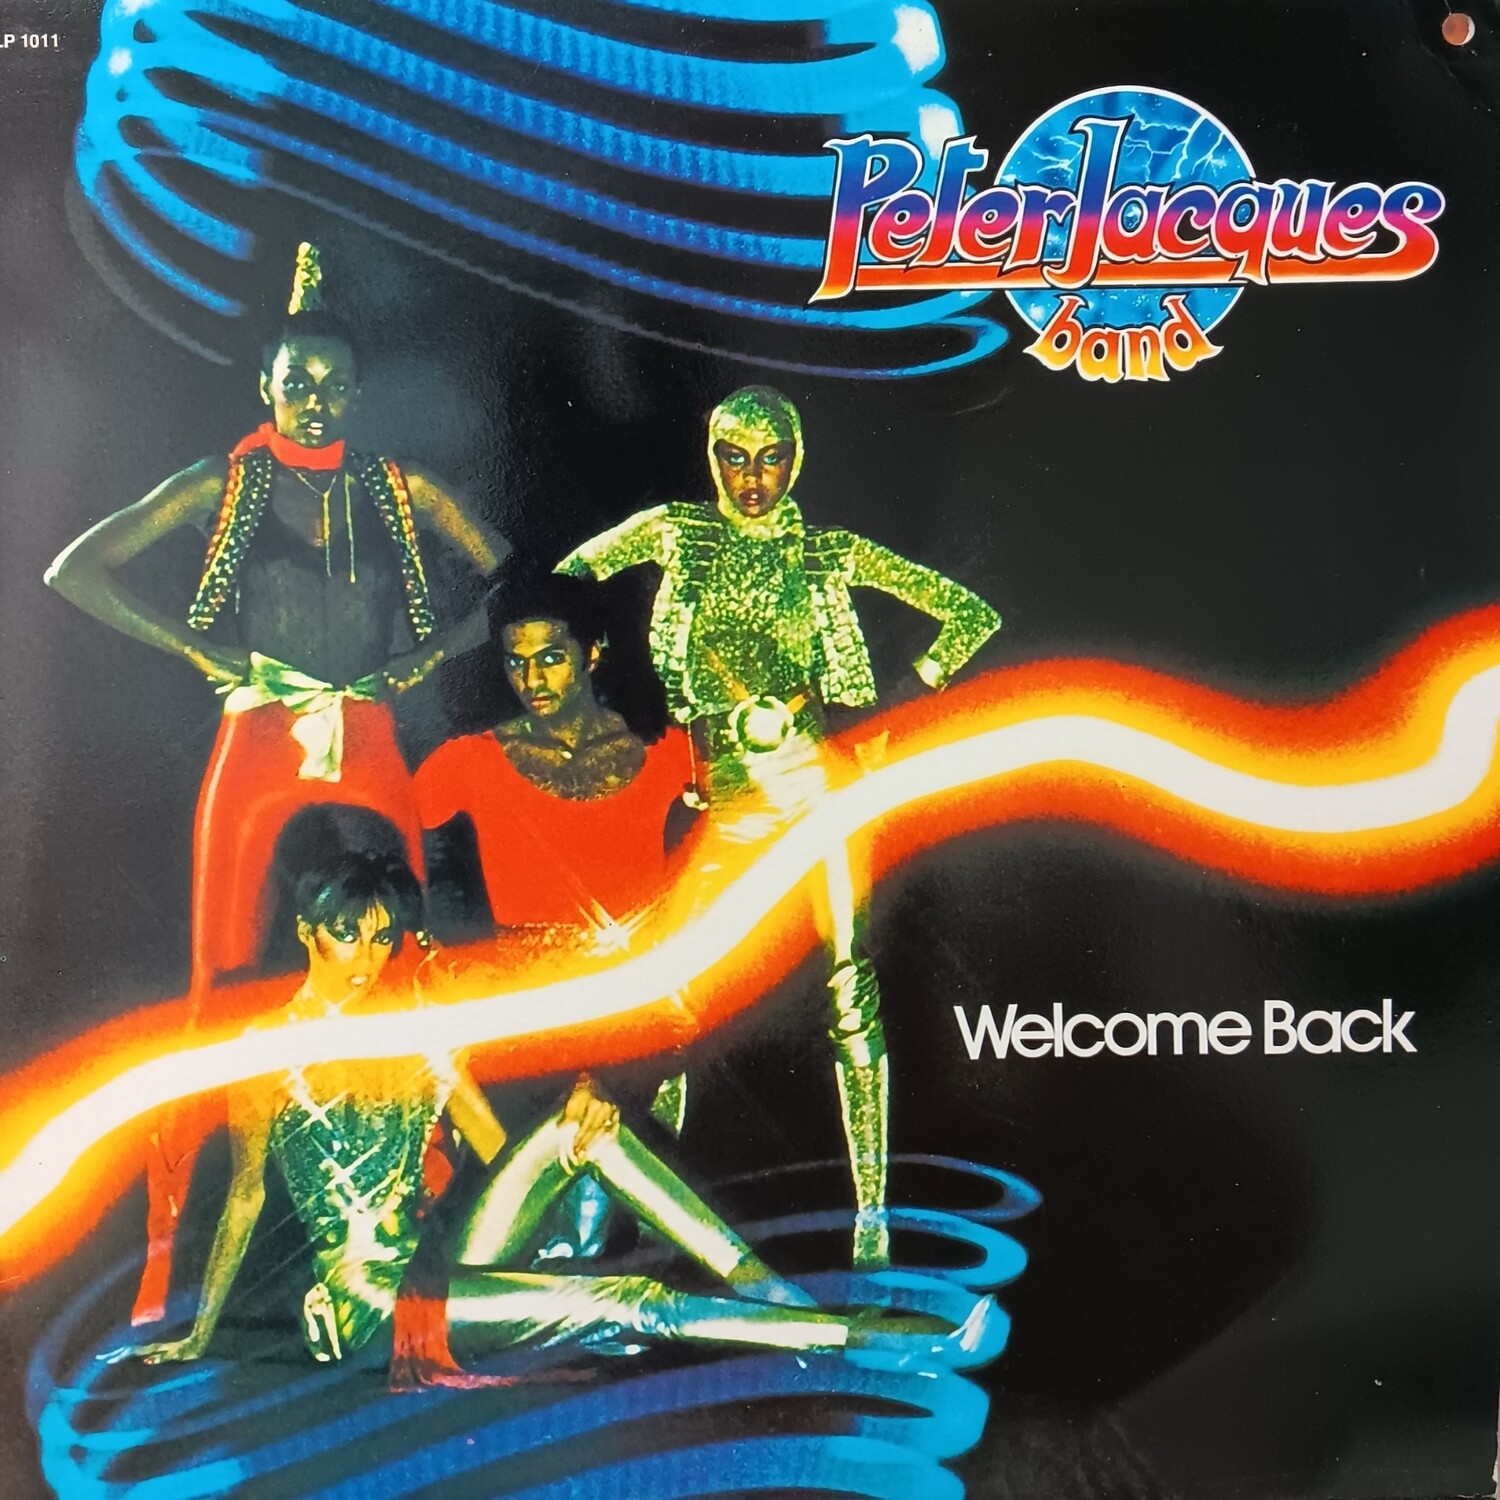 Peter Jacques Band - Welcome Back